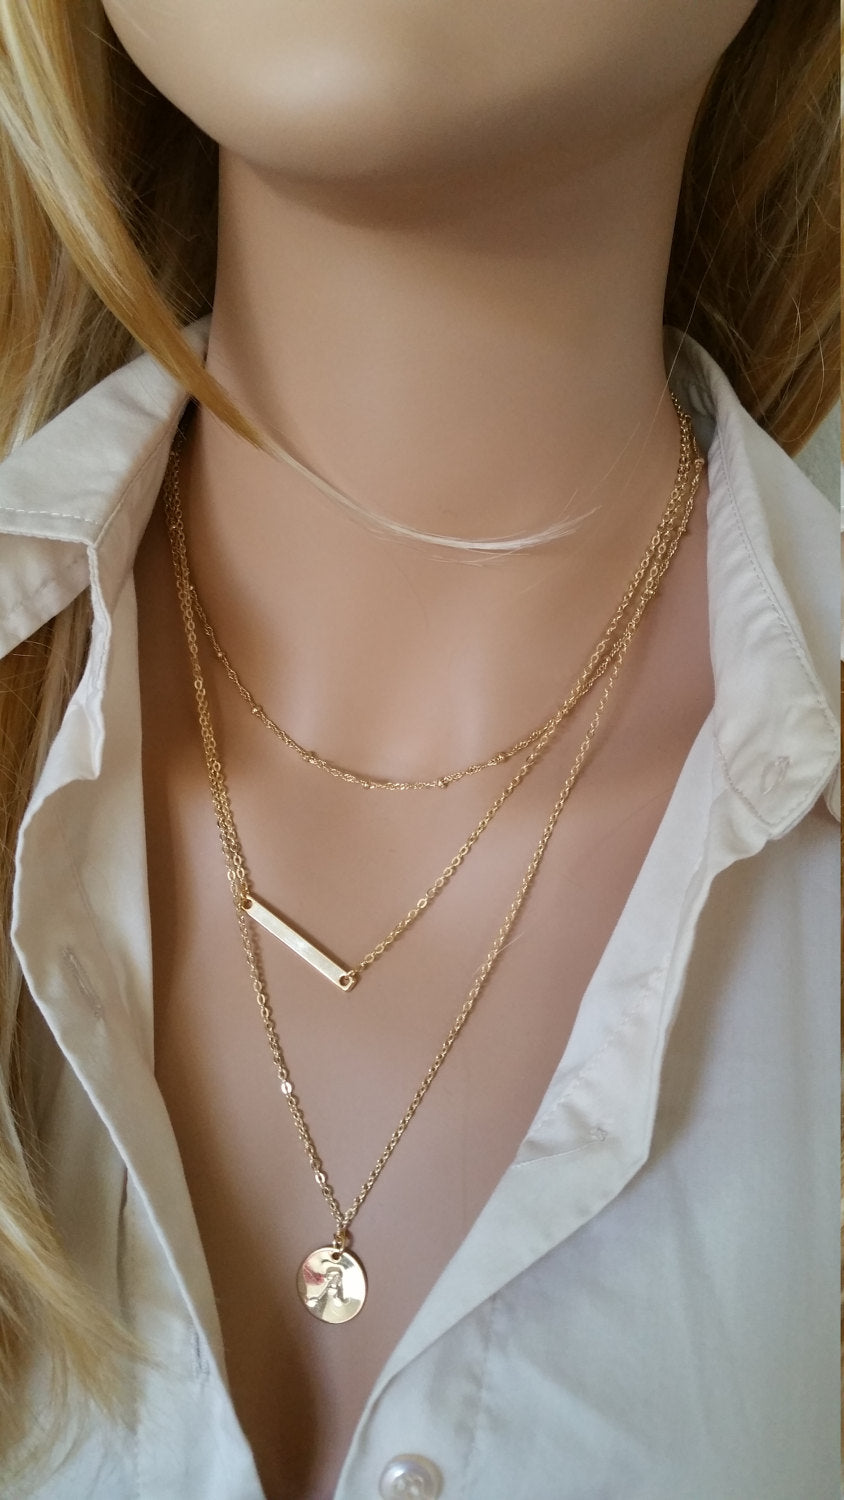 CLASSIC CHAINS: CREATE YOUR OWN LAYERED JEWELRY – DBL JEWELRY